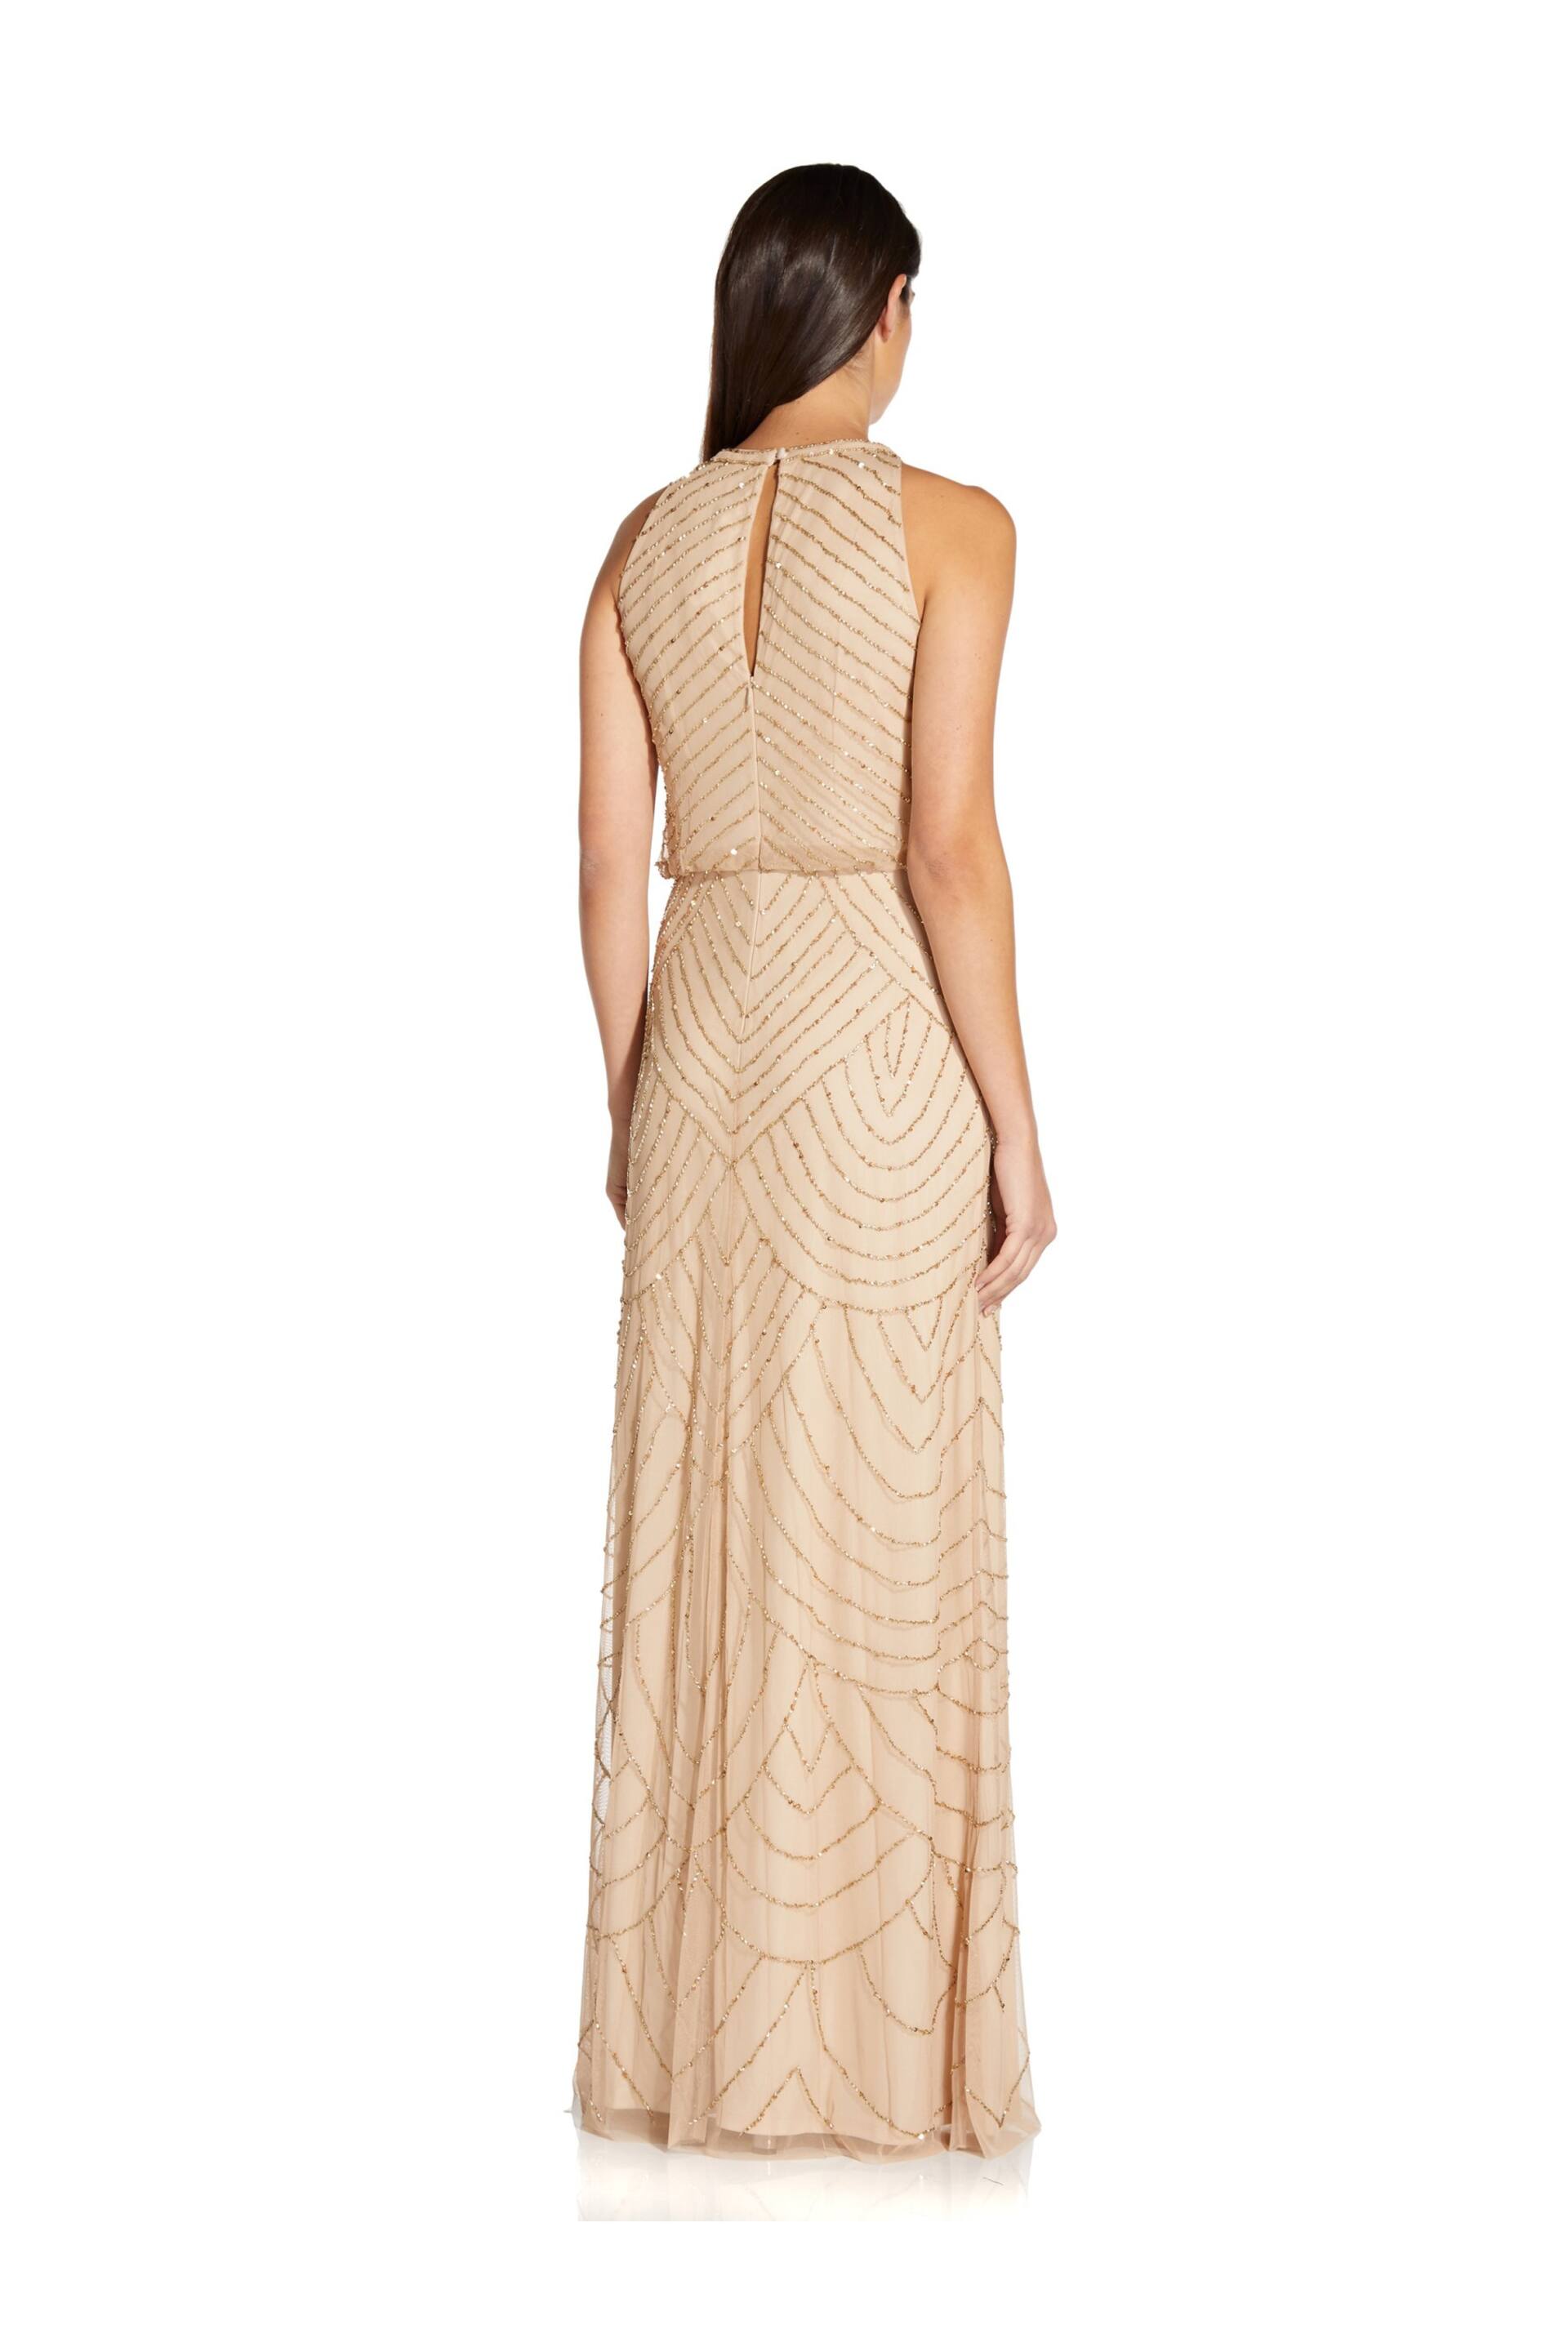 Adrianna Papell Beaded Halter Gown - Image 2 of 6